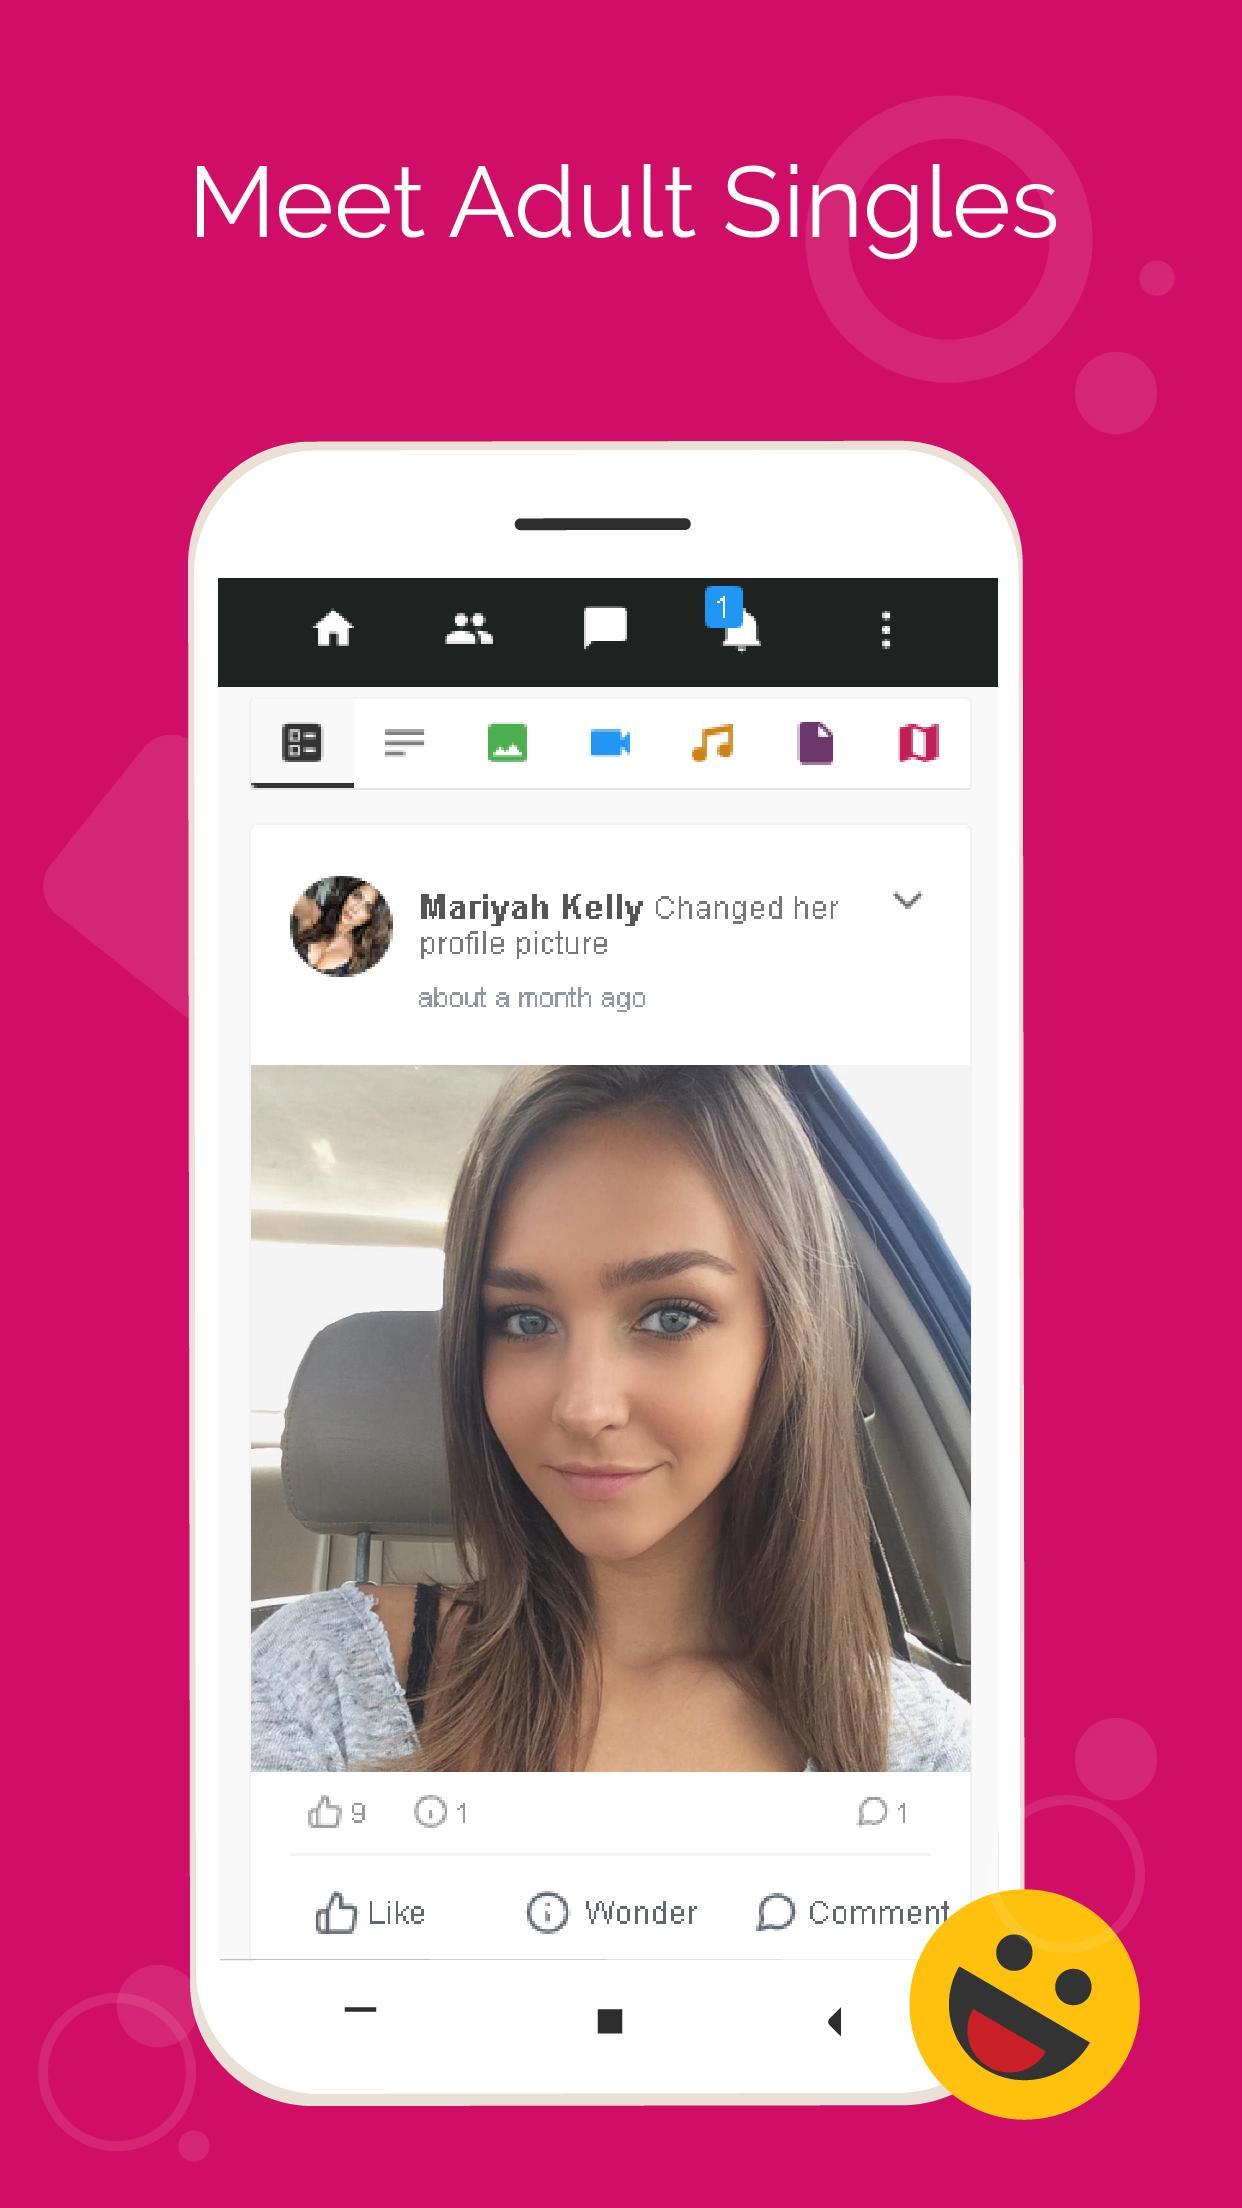 LOVELY – Your Dating App To Meet Singles Nearby